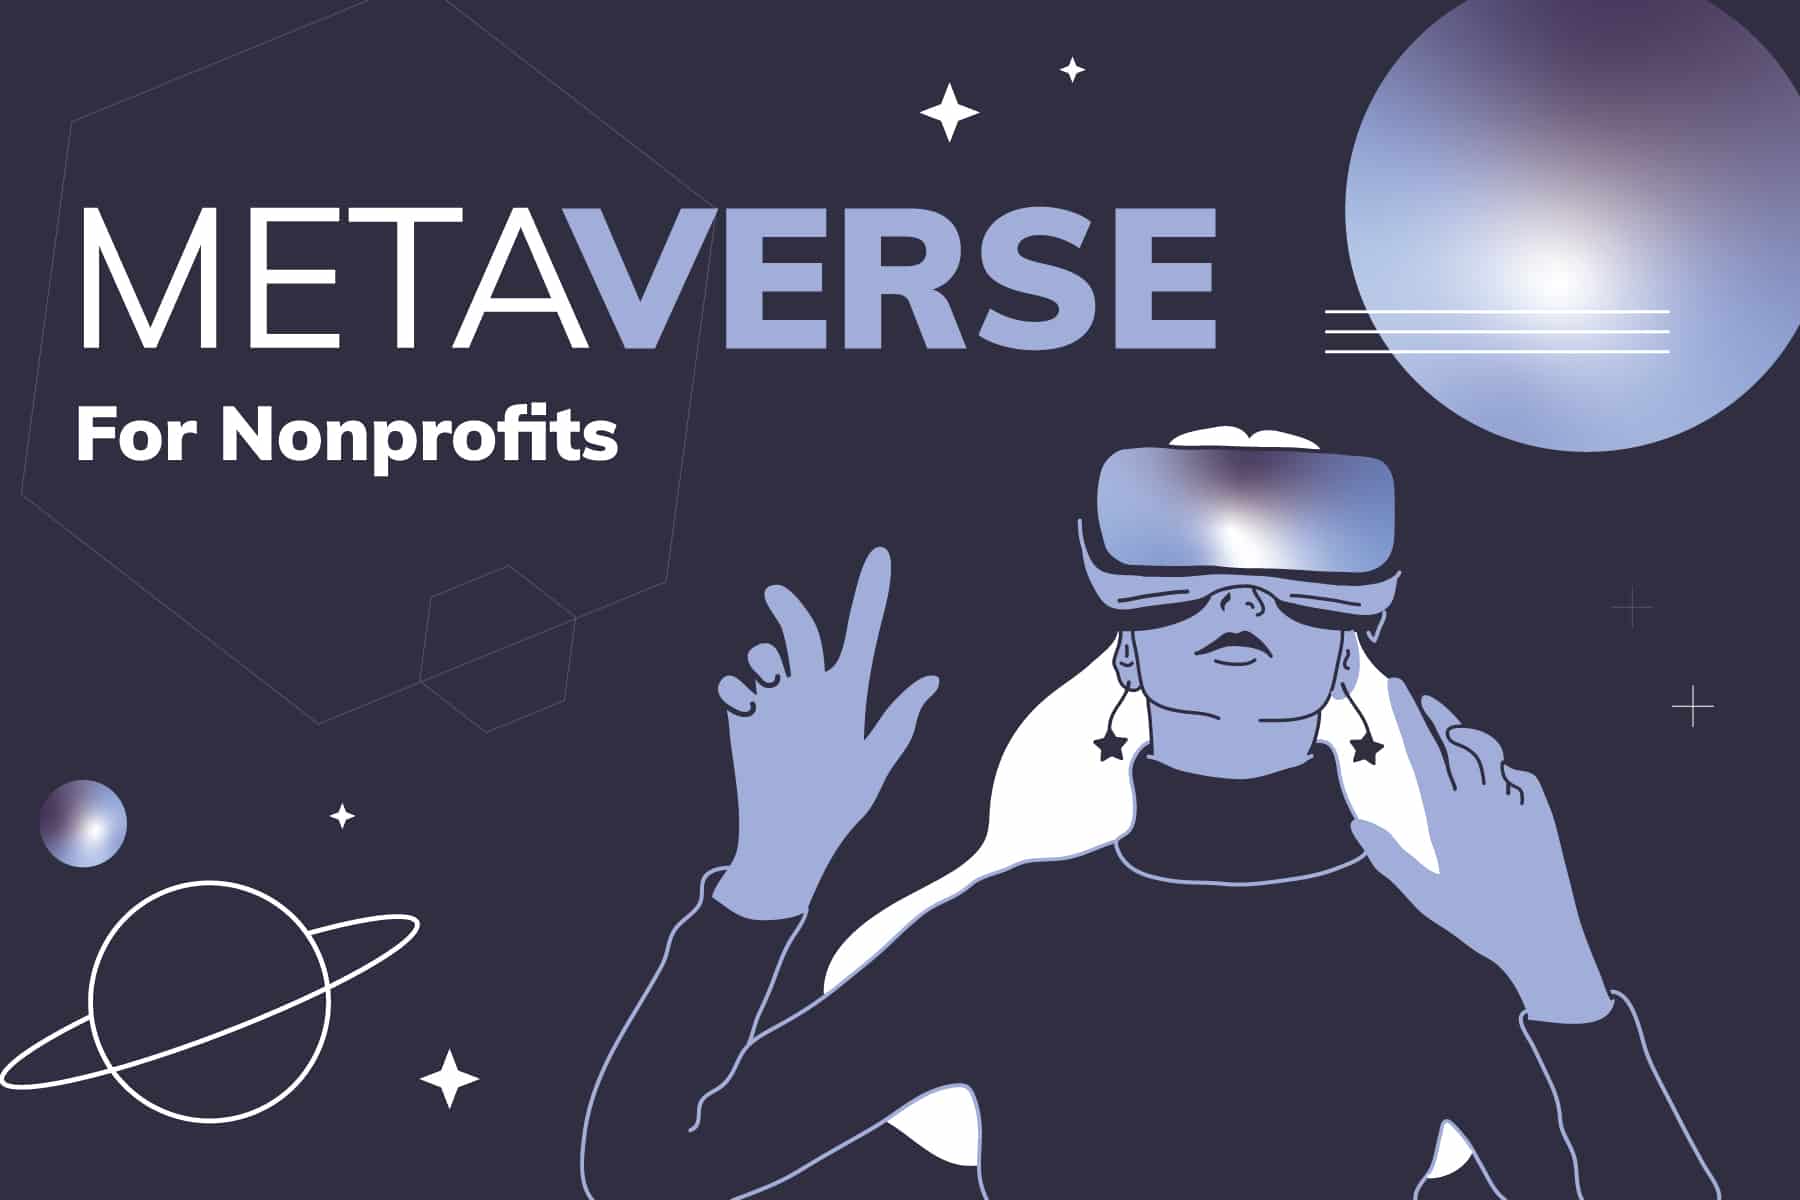 "metaverse for nonprofits" and graphic of person with VR headset on